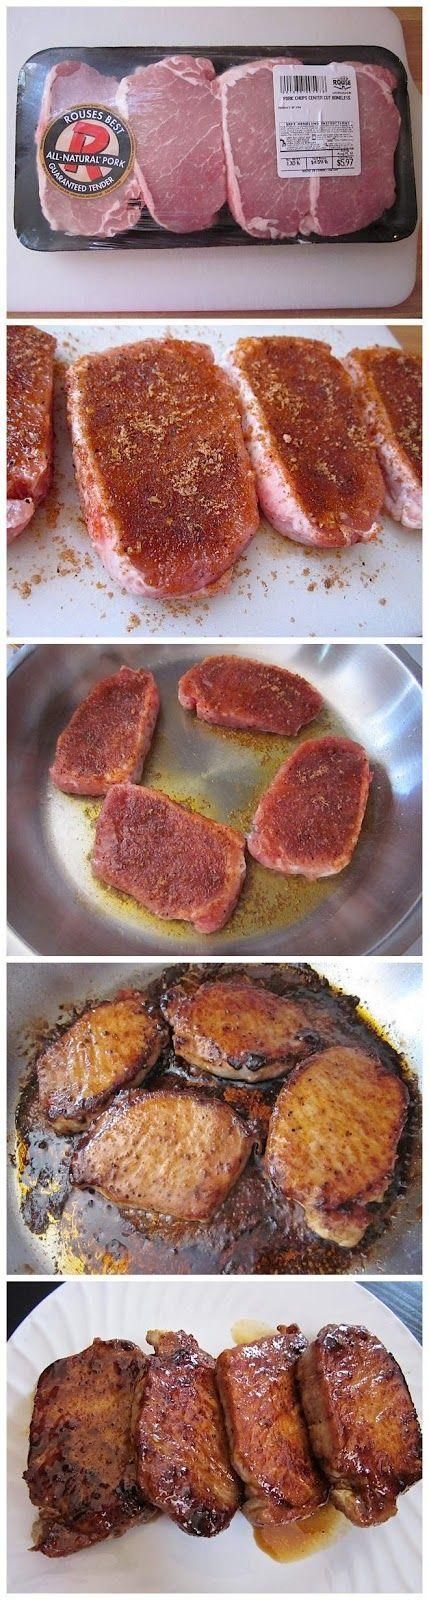 glazed pork chops – I have made these twice. My sister in law requested it the second time, Nathan lov